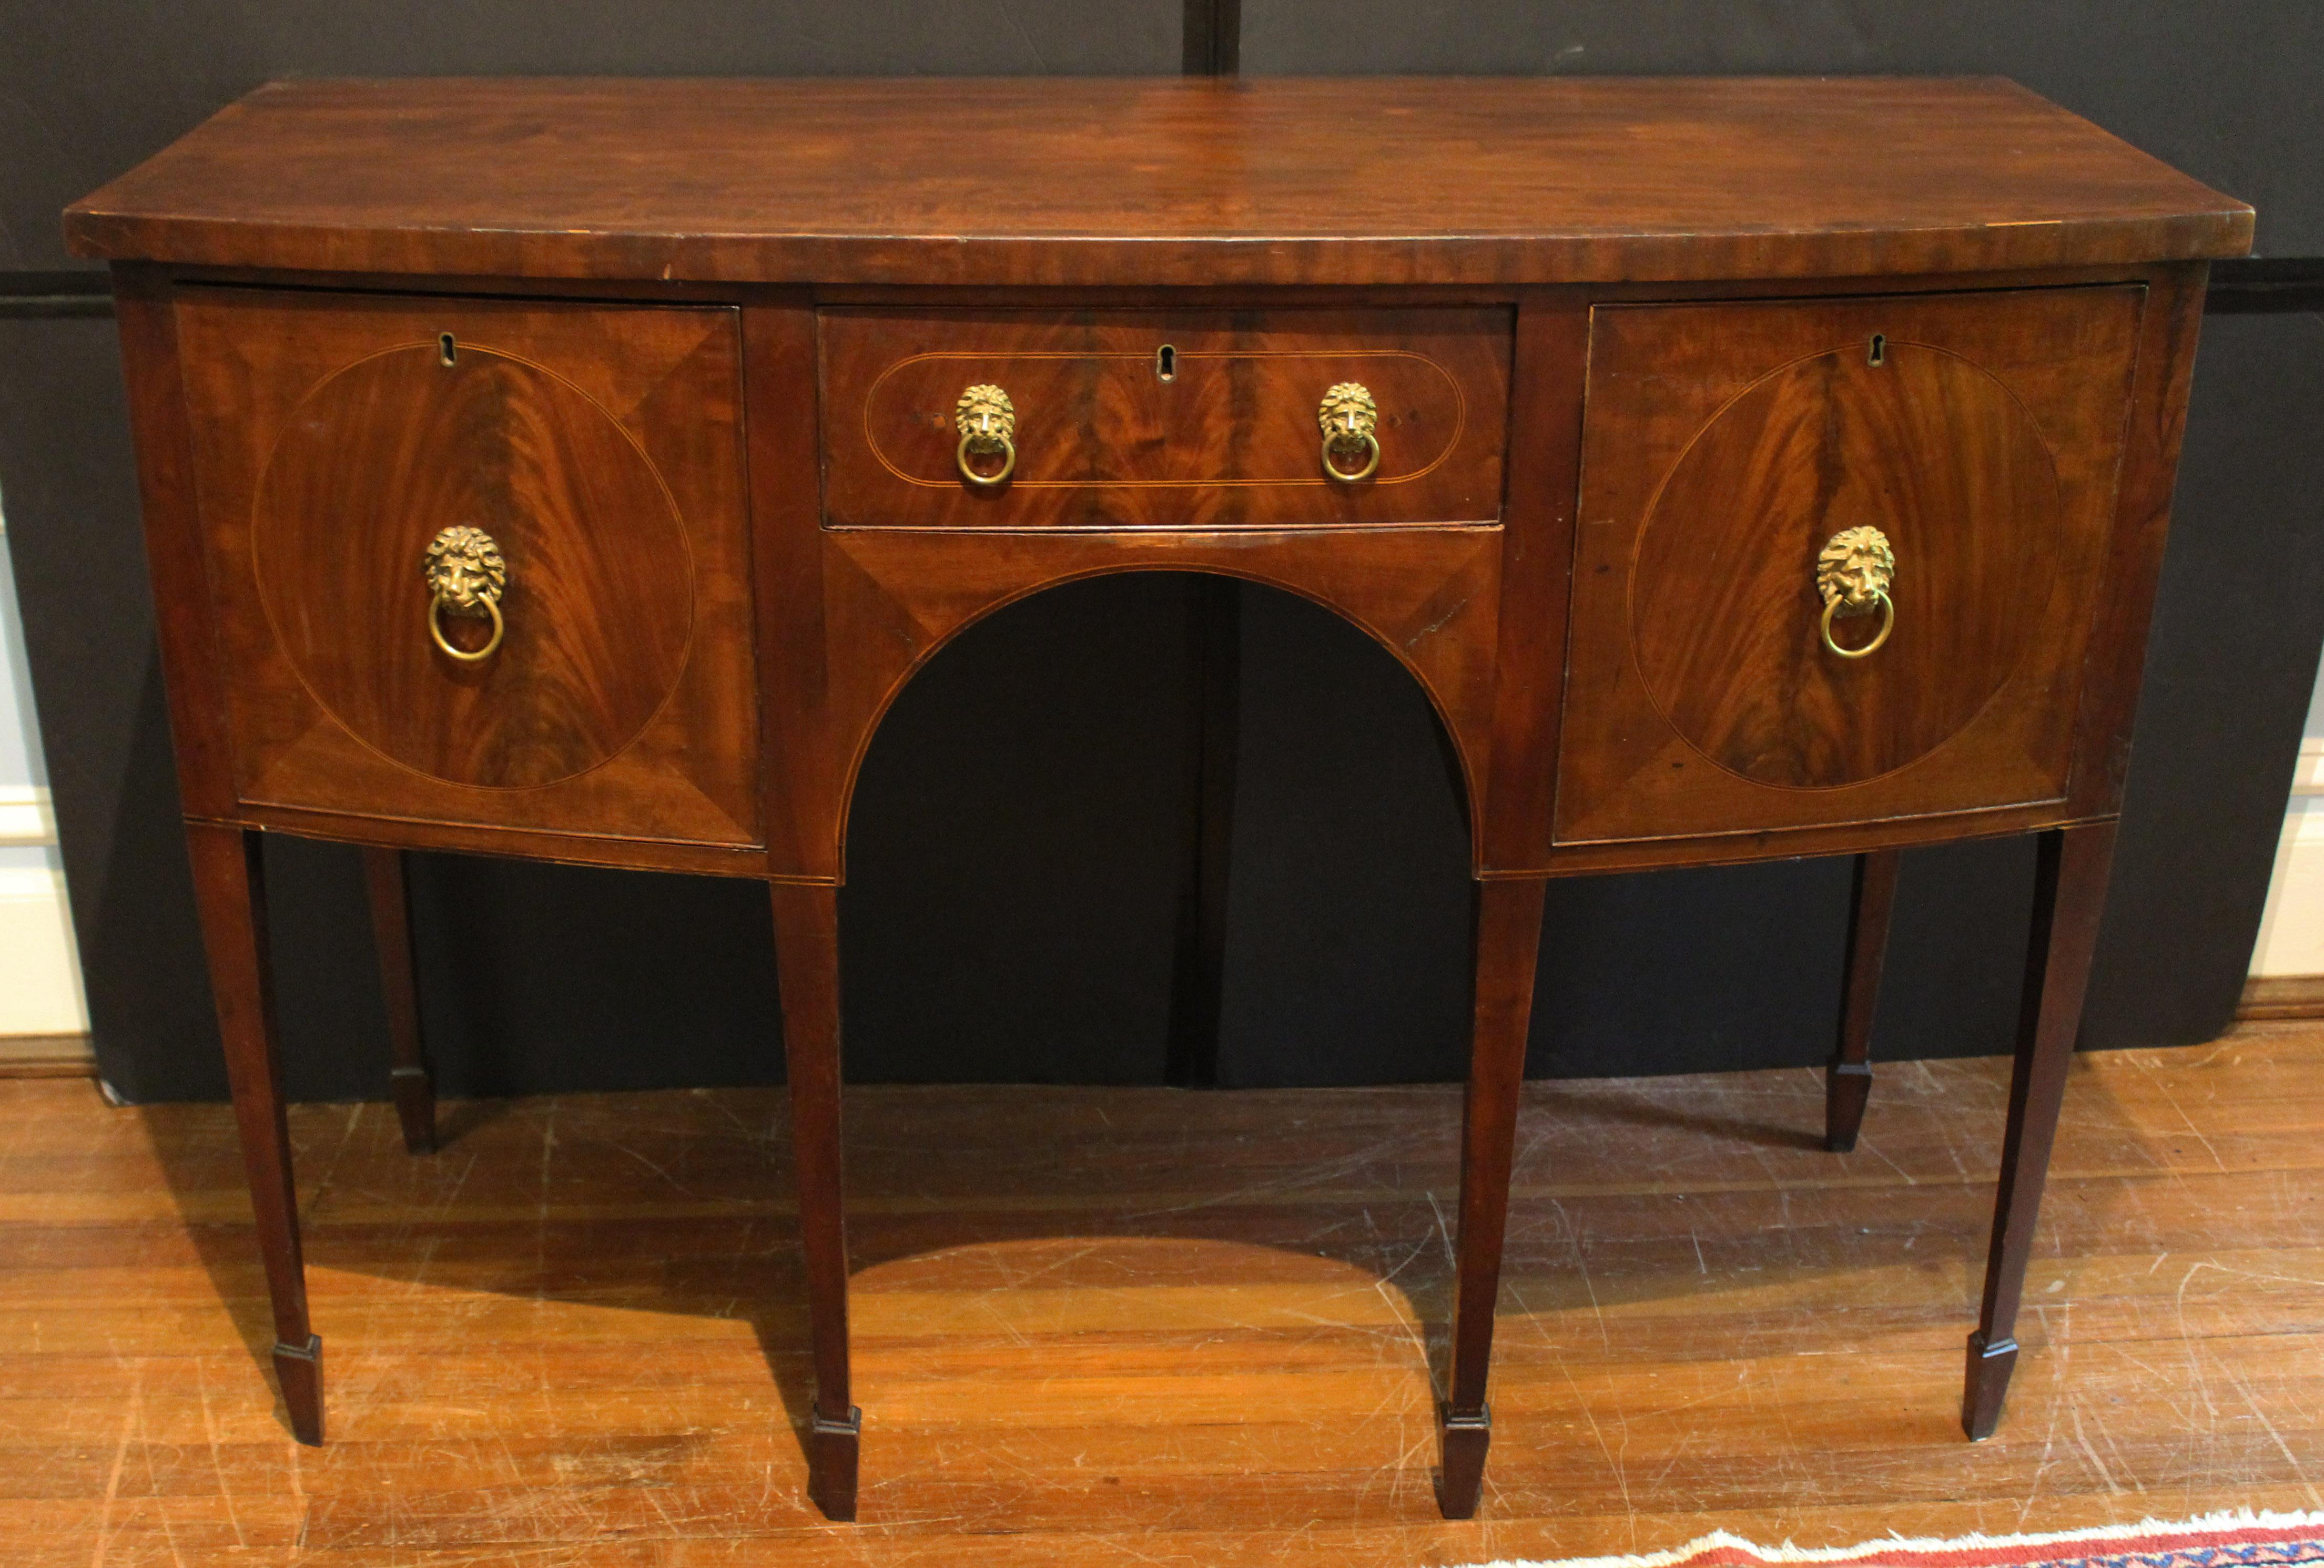 Circa 1770-90 George III small bowfront sideboard, English. Mahogany & mahogany veneers with oak secondary. Line inlays, banded top & circular flame panels distinguish this London made piece. Raised on square, tapered legs with spade feet. Deep